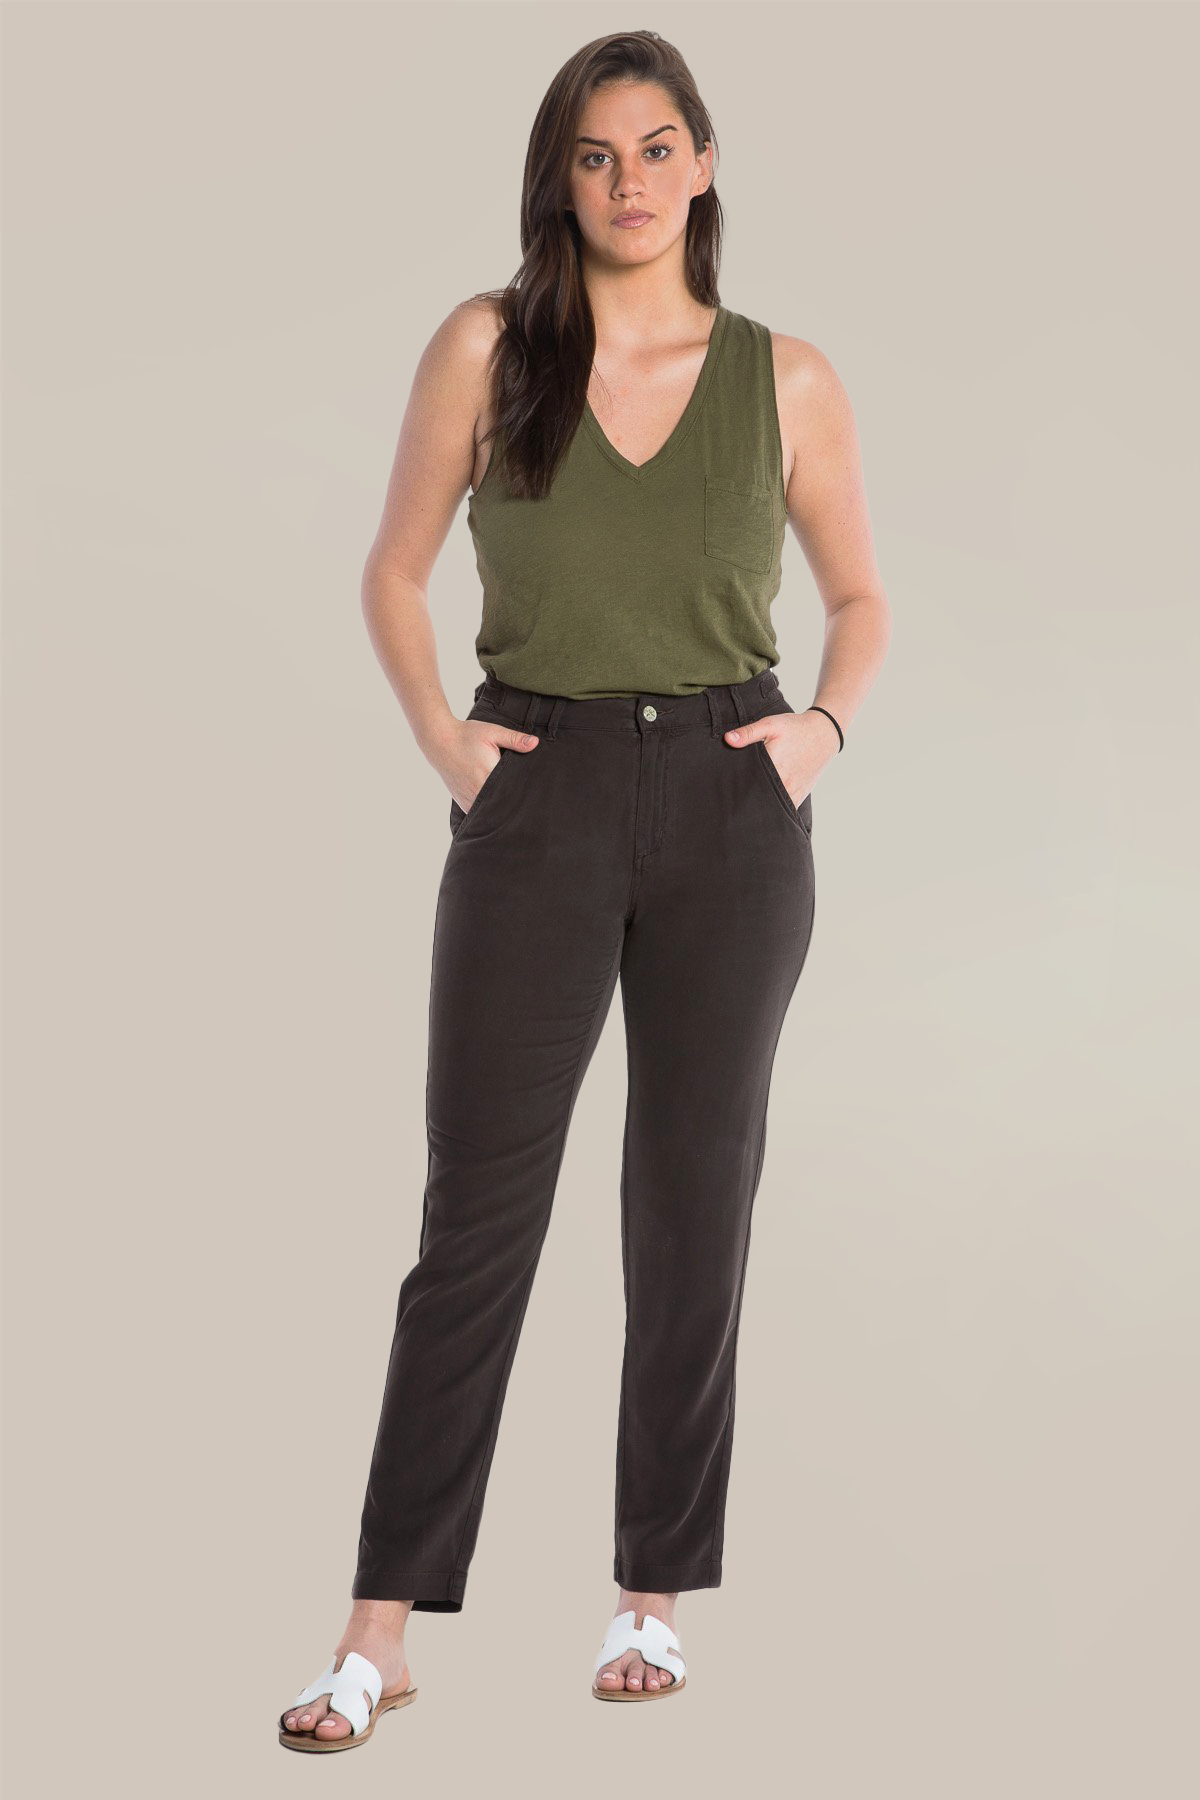 100% Silk ankle pants in Licorice